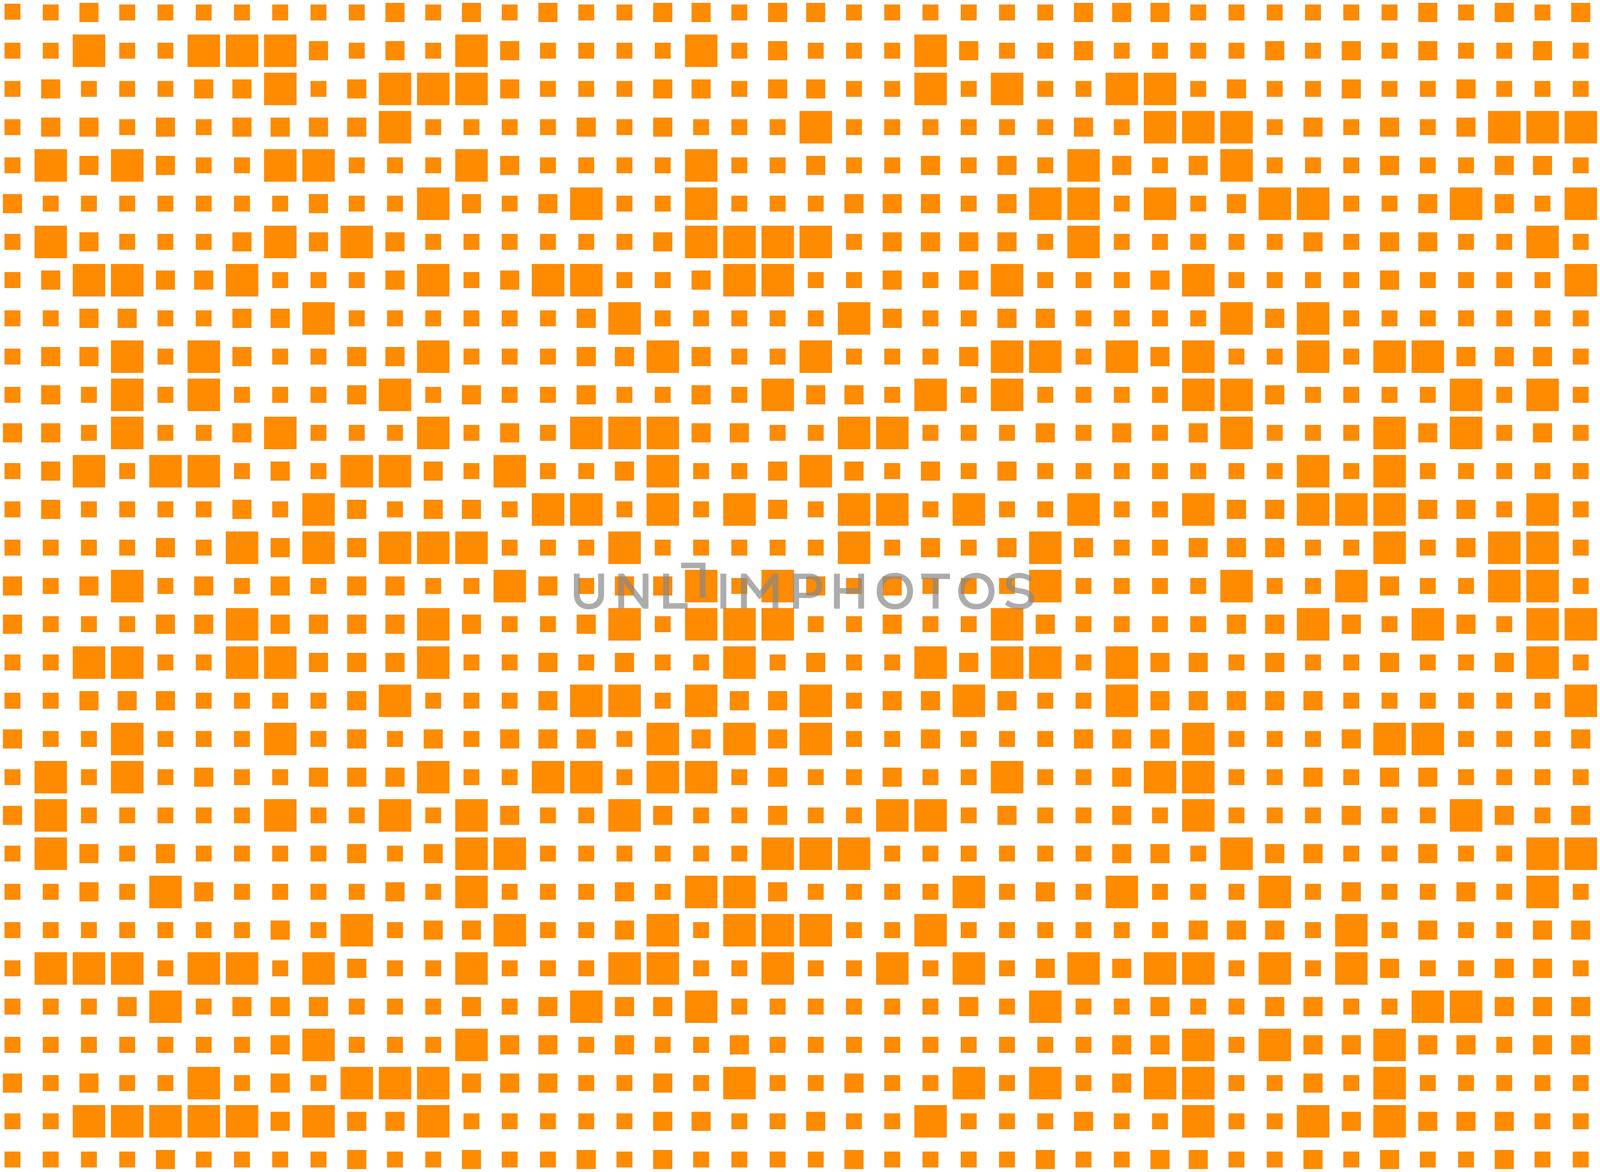 illustration of seamless pattern of square orange background, different sizes shapes by Andreajk3